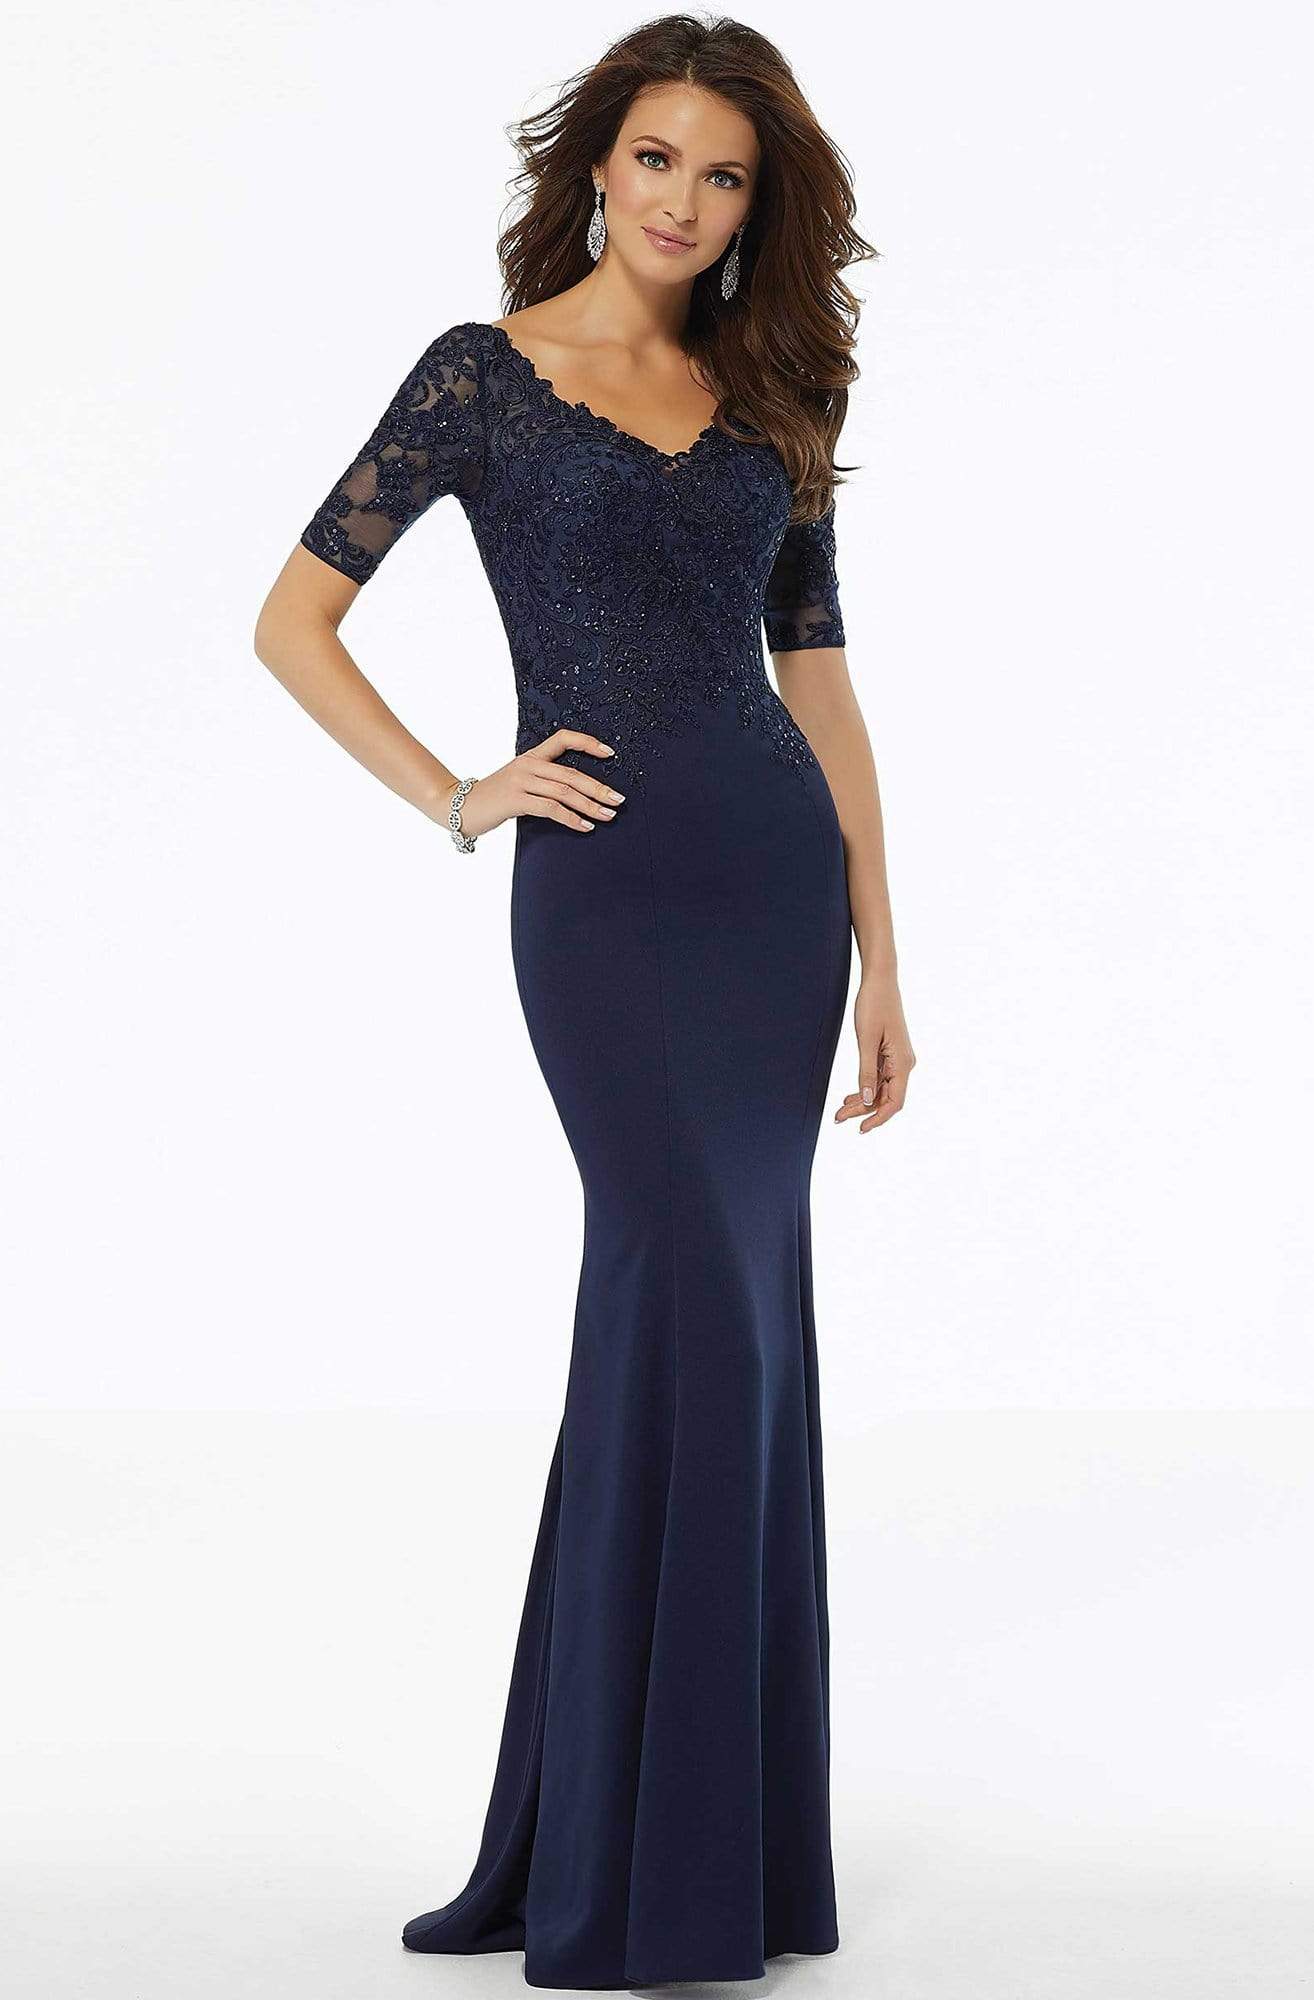 MGNY By Mori Lee - 72108 Beaded Lace Crepe Sheath Dress Mother of the Bride Dresses 2 / Navy